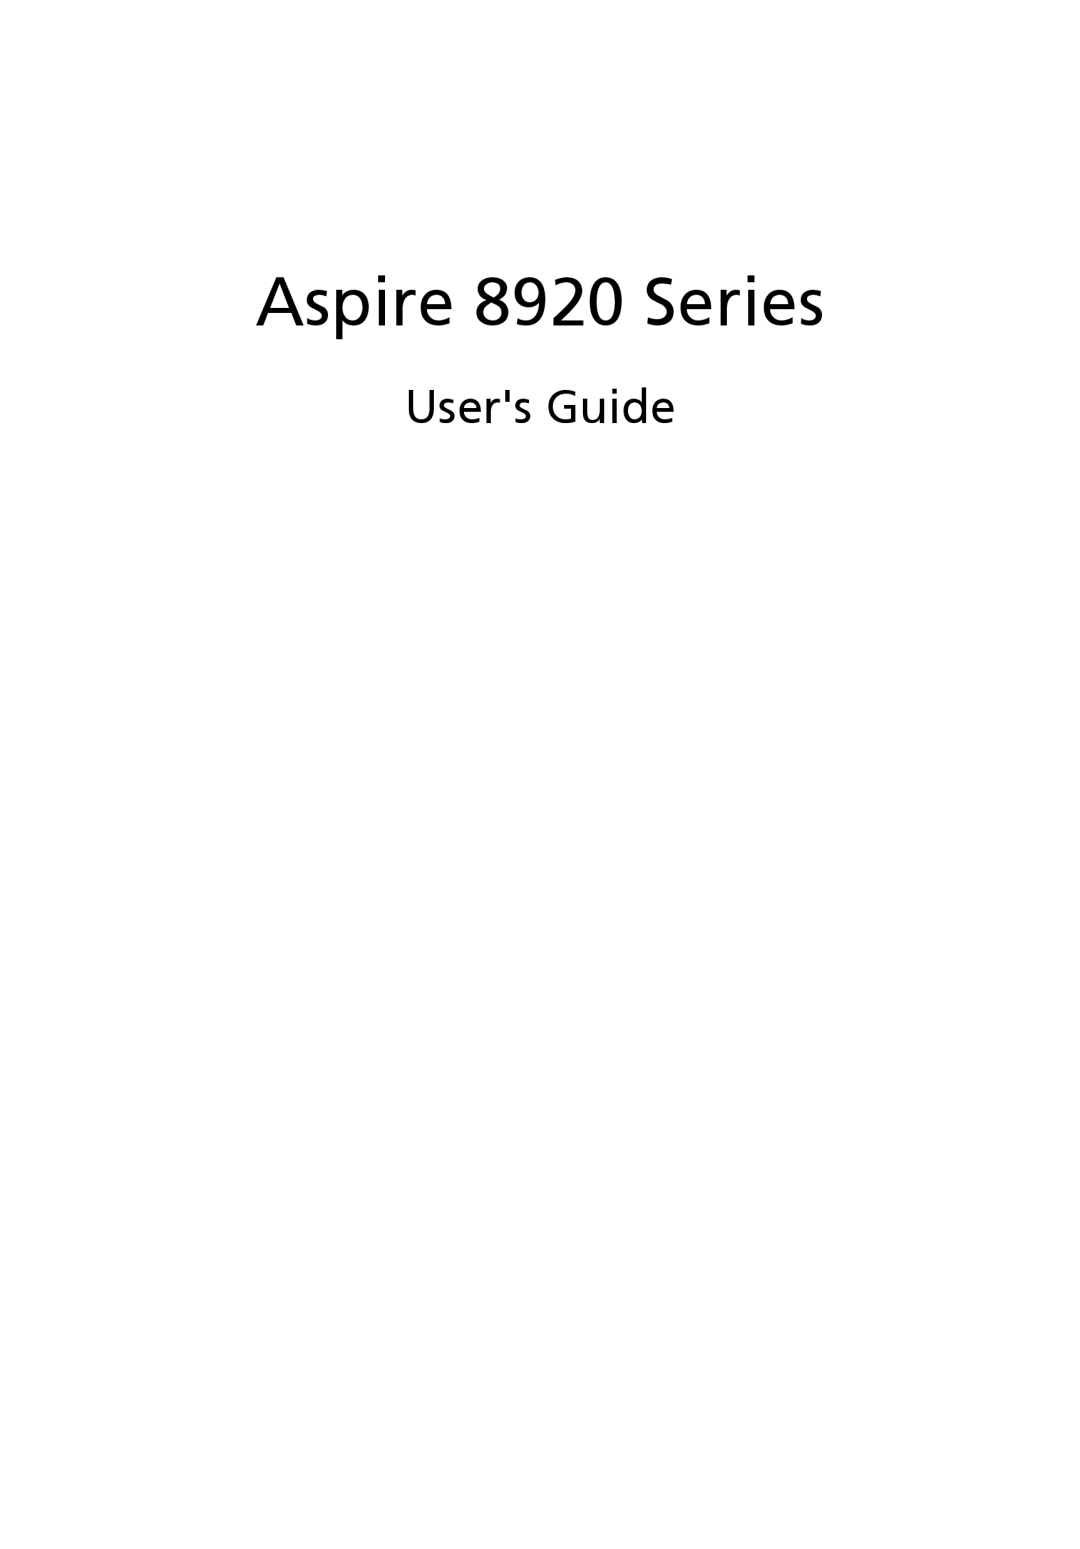 Acer LE1 manual Users Guide, Aspire 8920 Series 